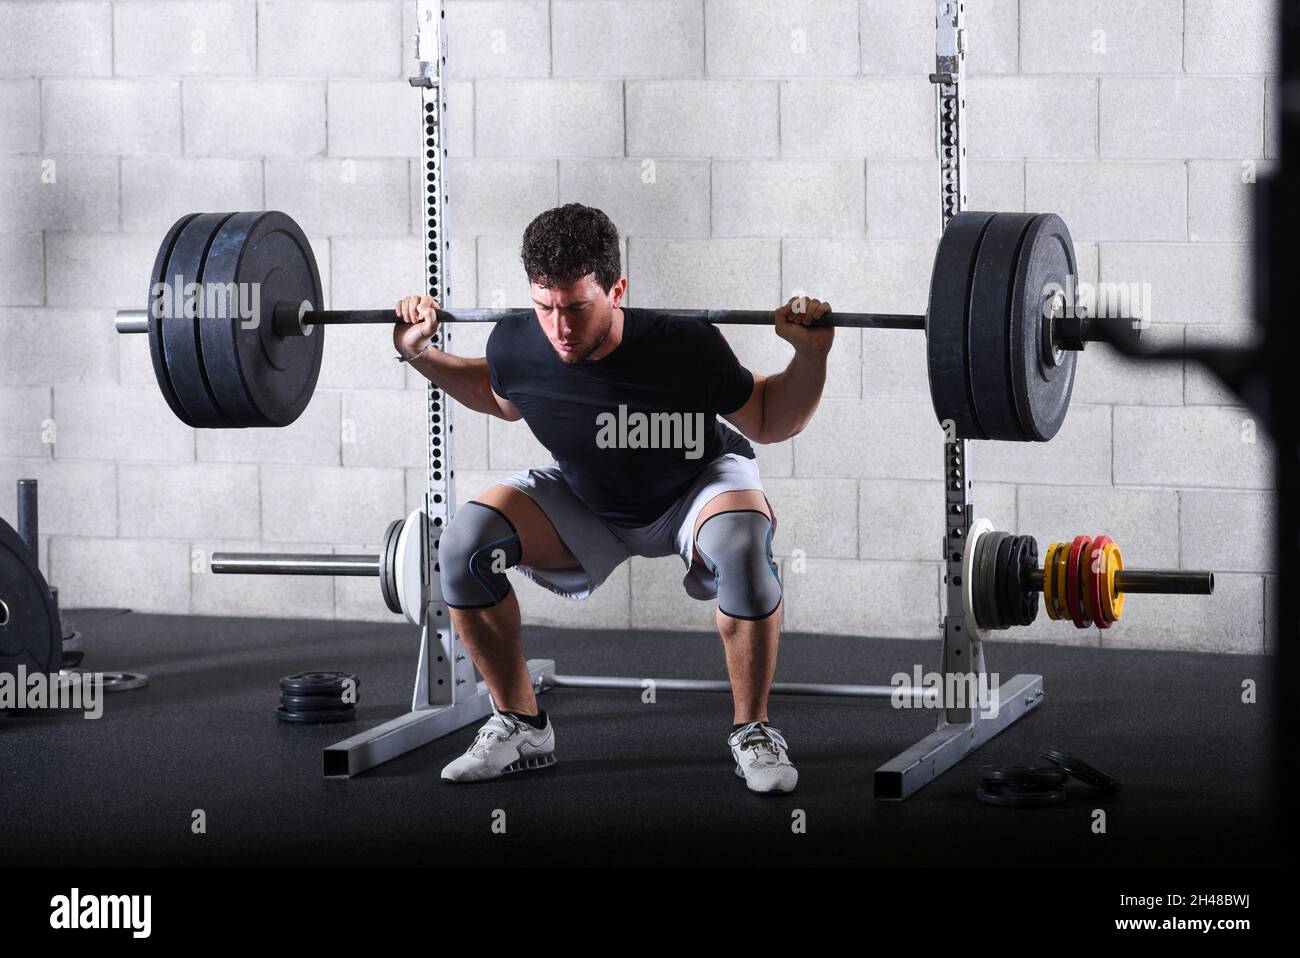 Full body view of young man performing back squats exercise in gym with heavy plates. Stock Photo